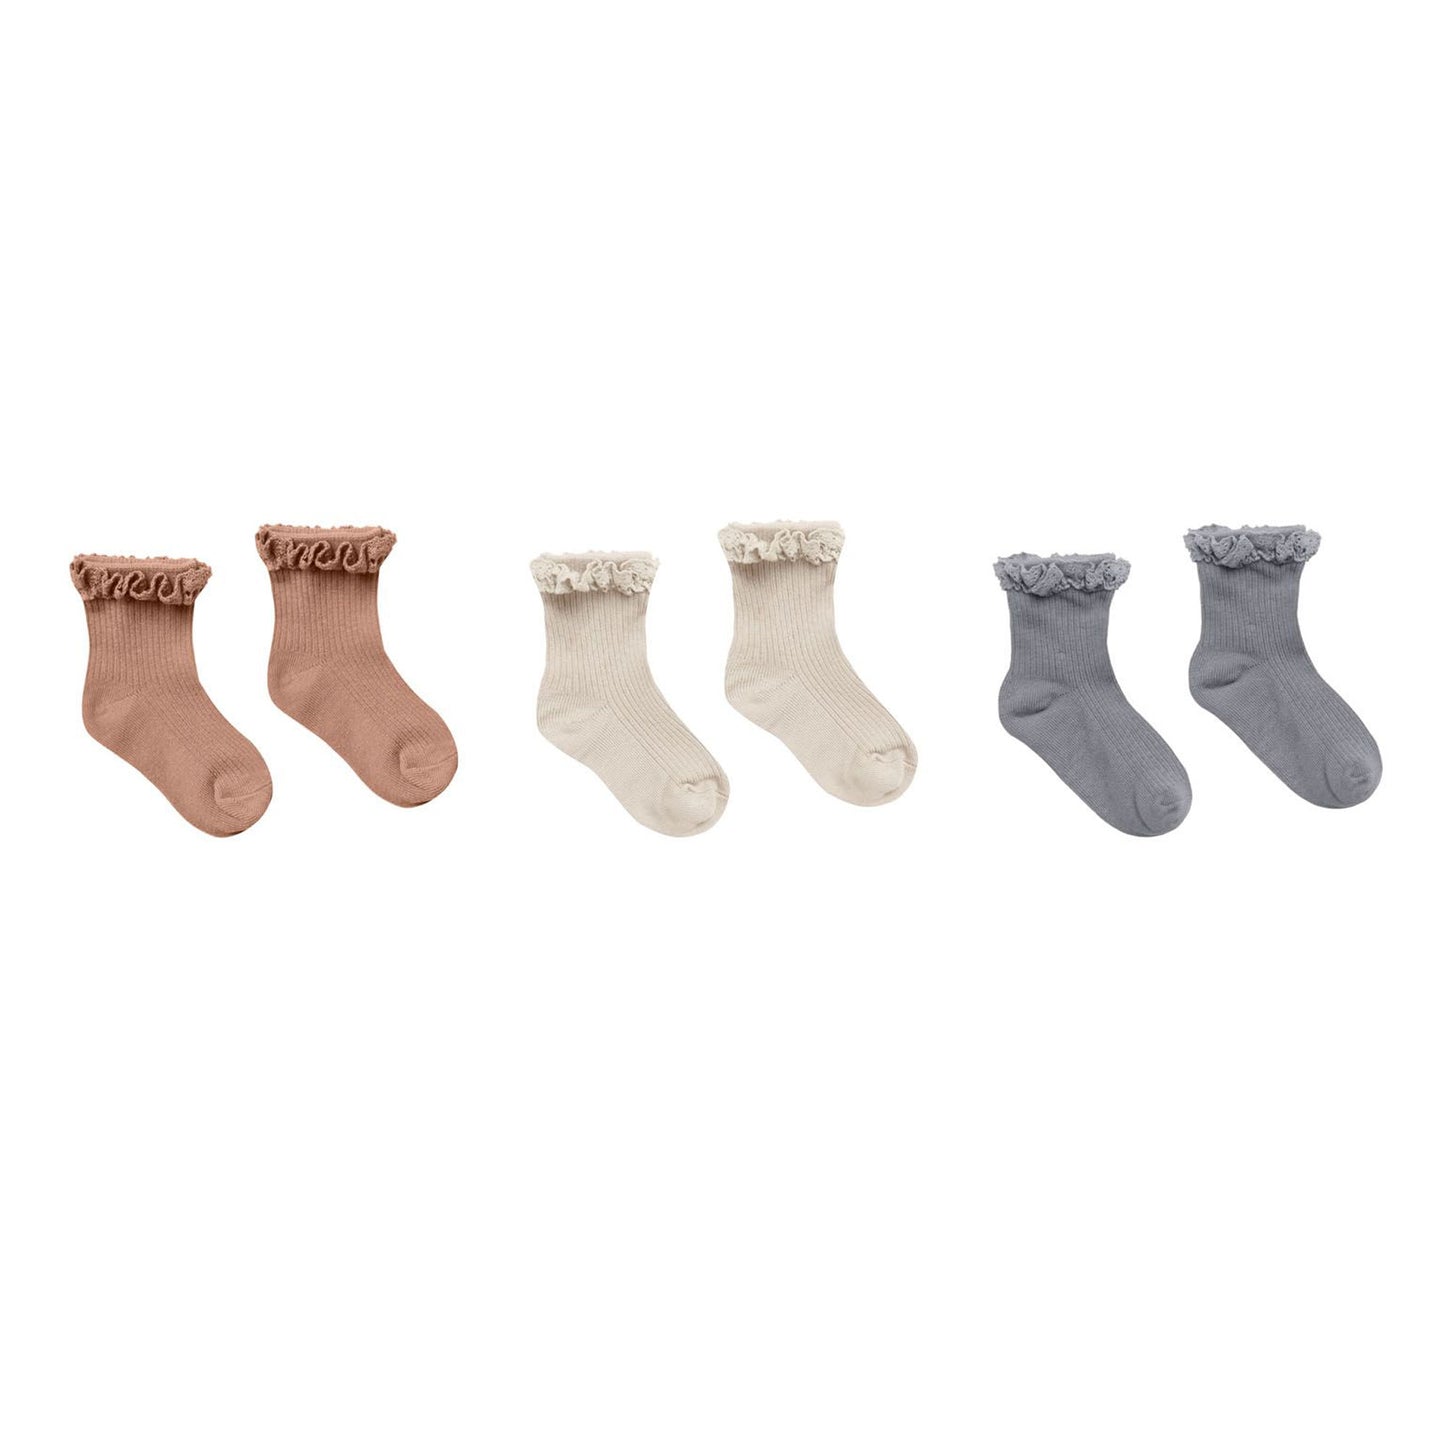 Rylee and Cru Lace Trim Socks - Spice / Natural / Dusty Blue